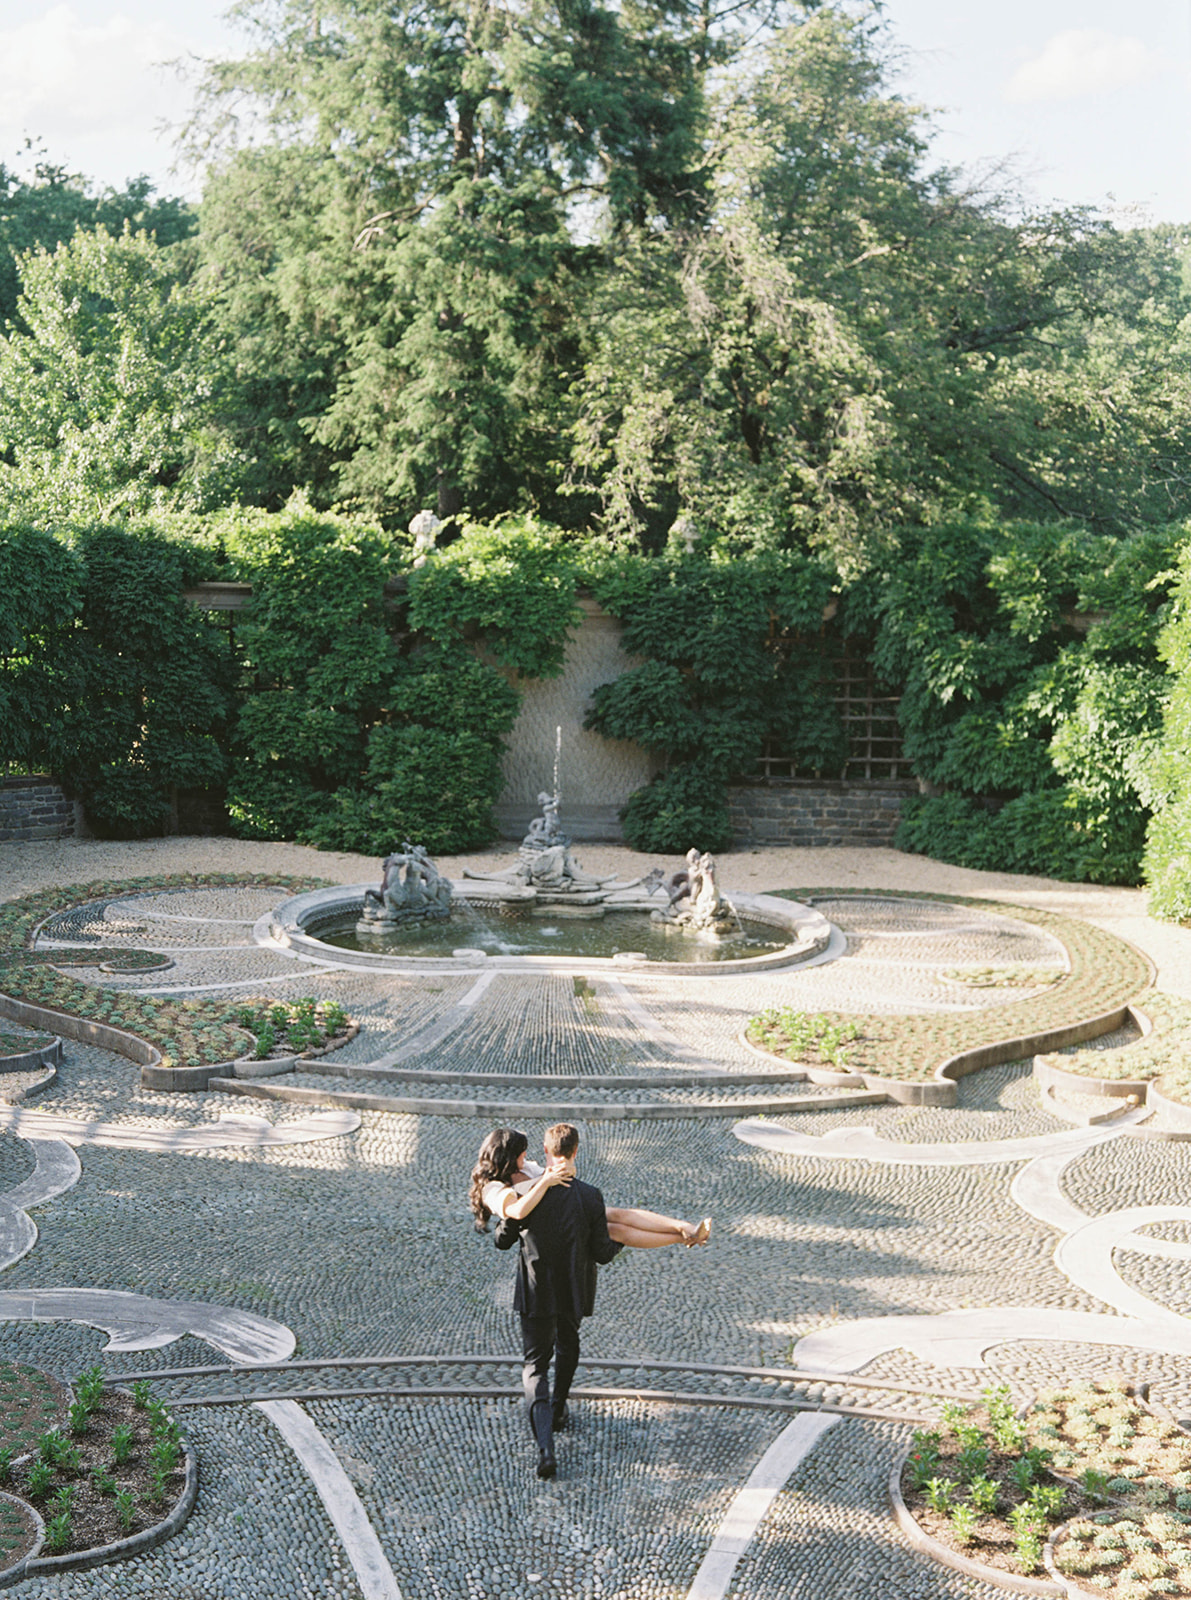 A couple poses for their engagement session in a garden.